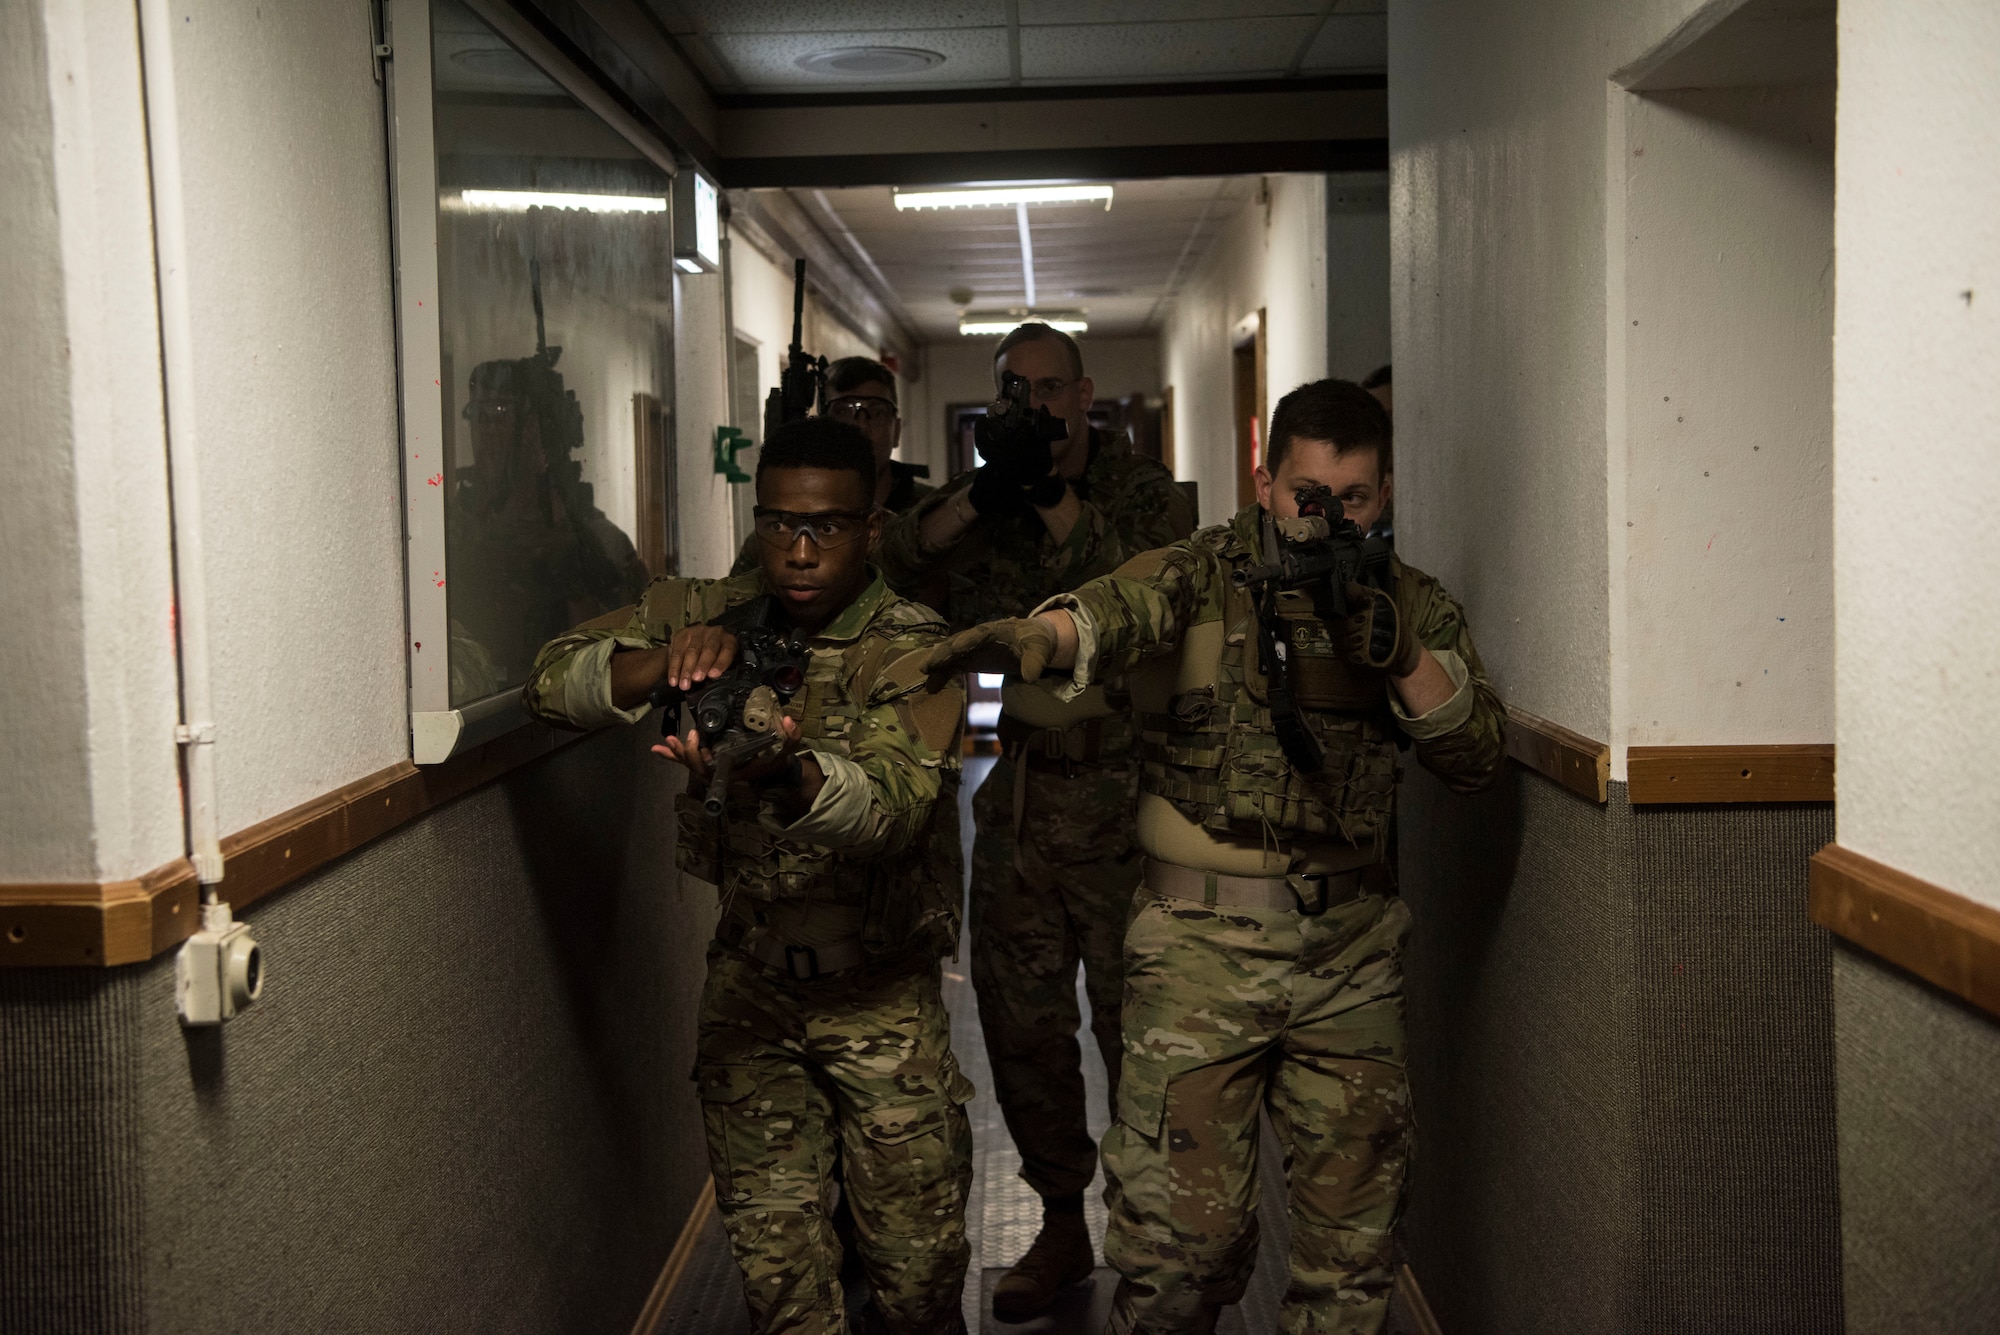 U.S. Air Force Airmen assigned to the 435th Security Forces Squadron practice building clearing techniques during close quarters battle training.